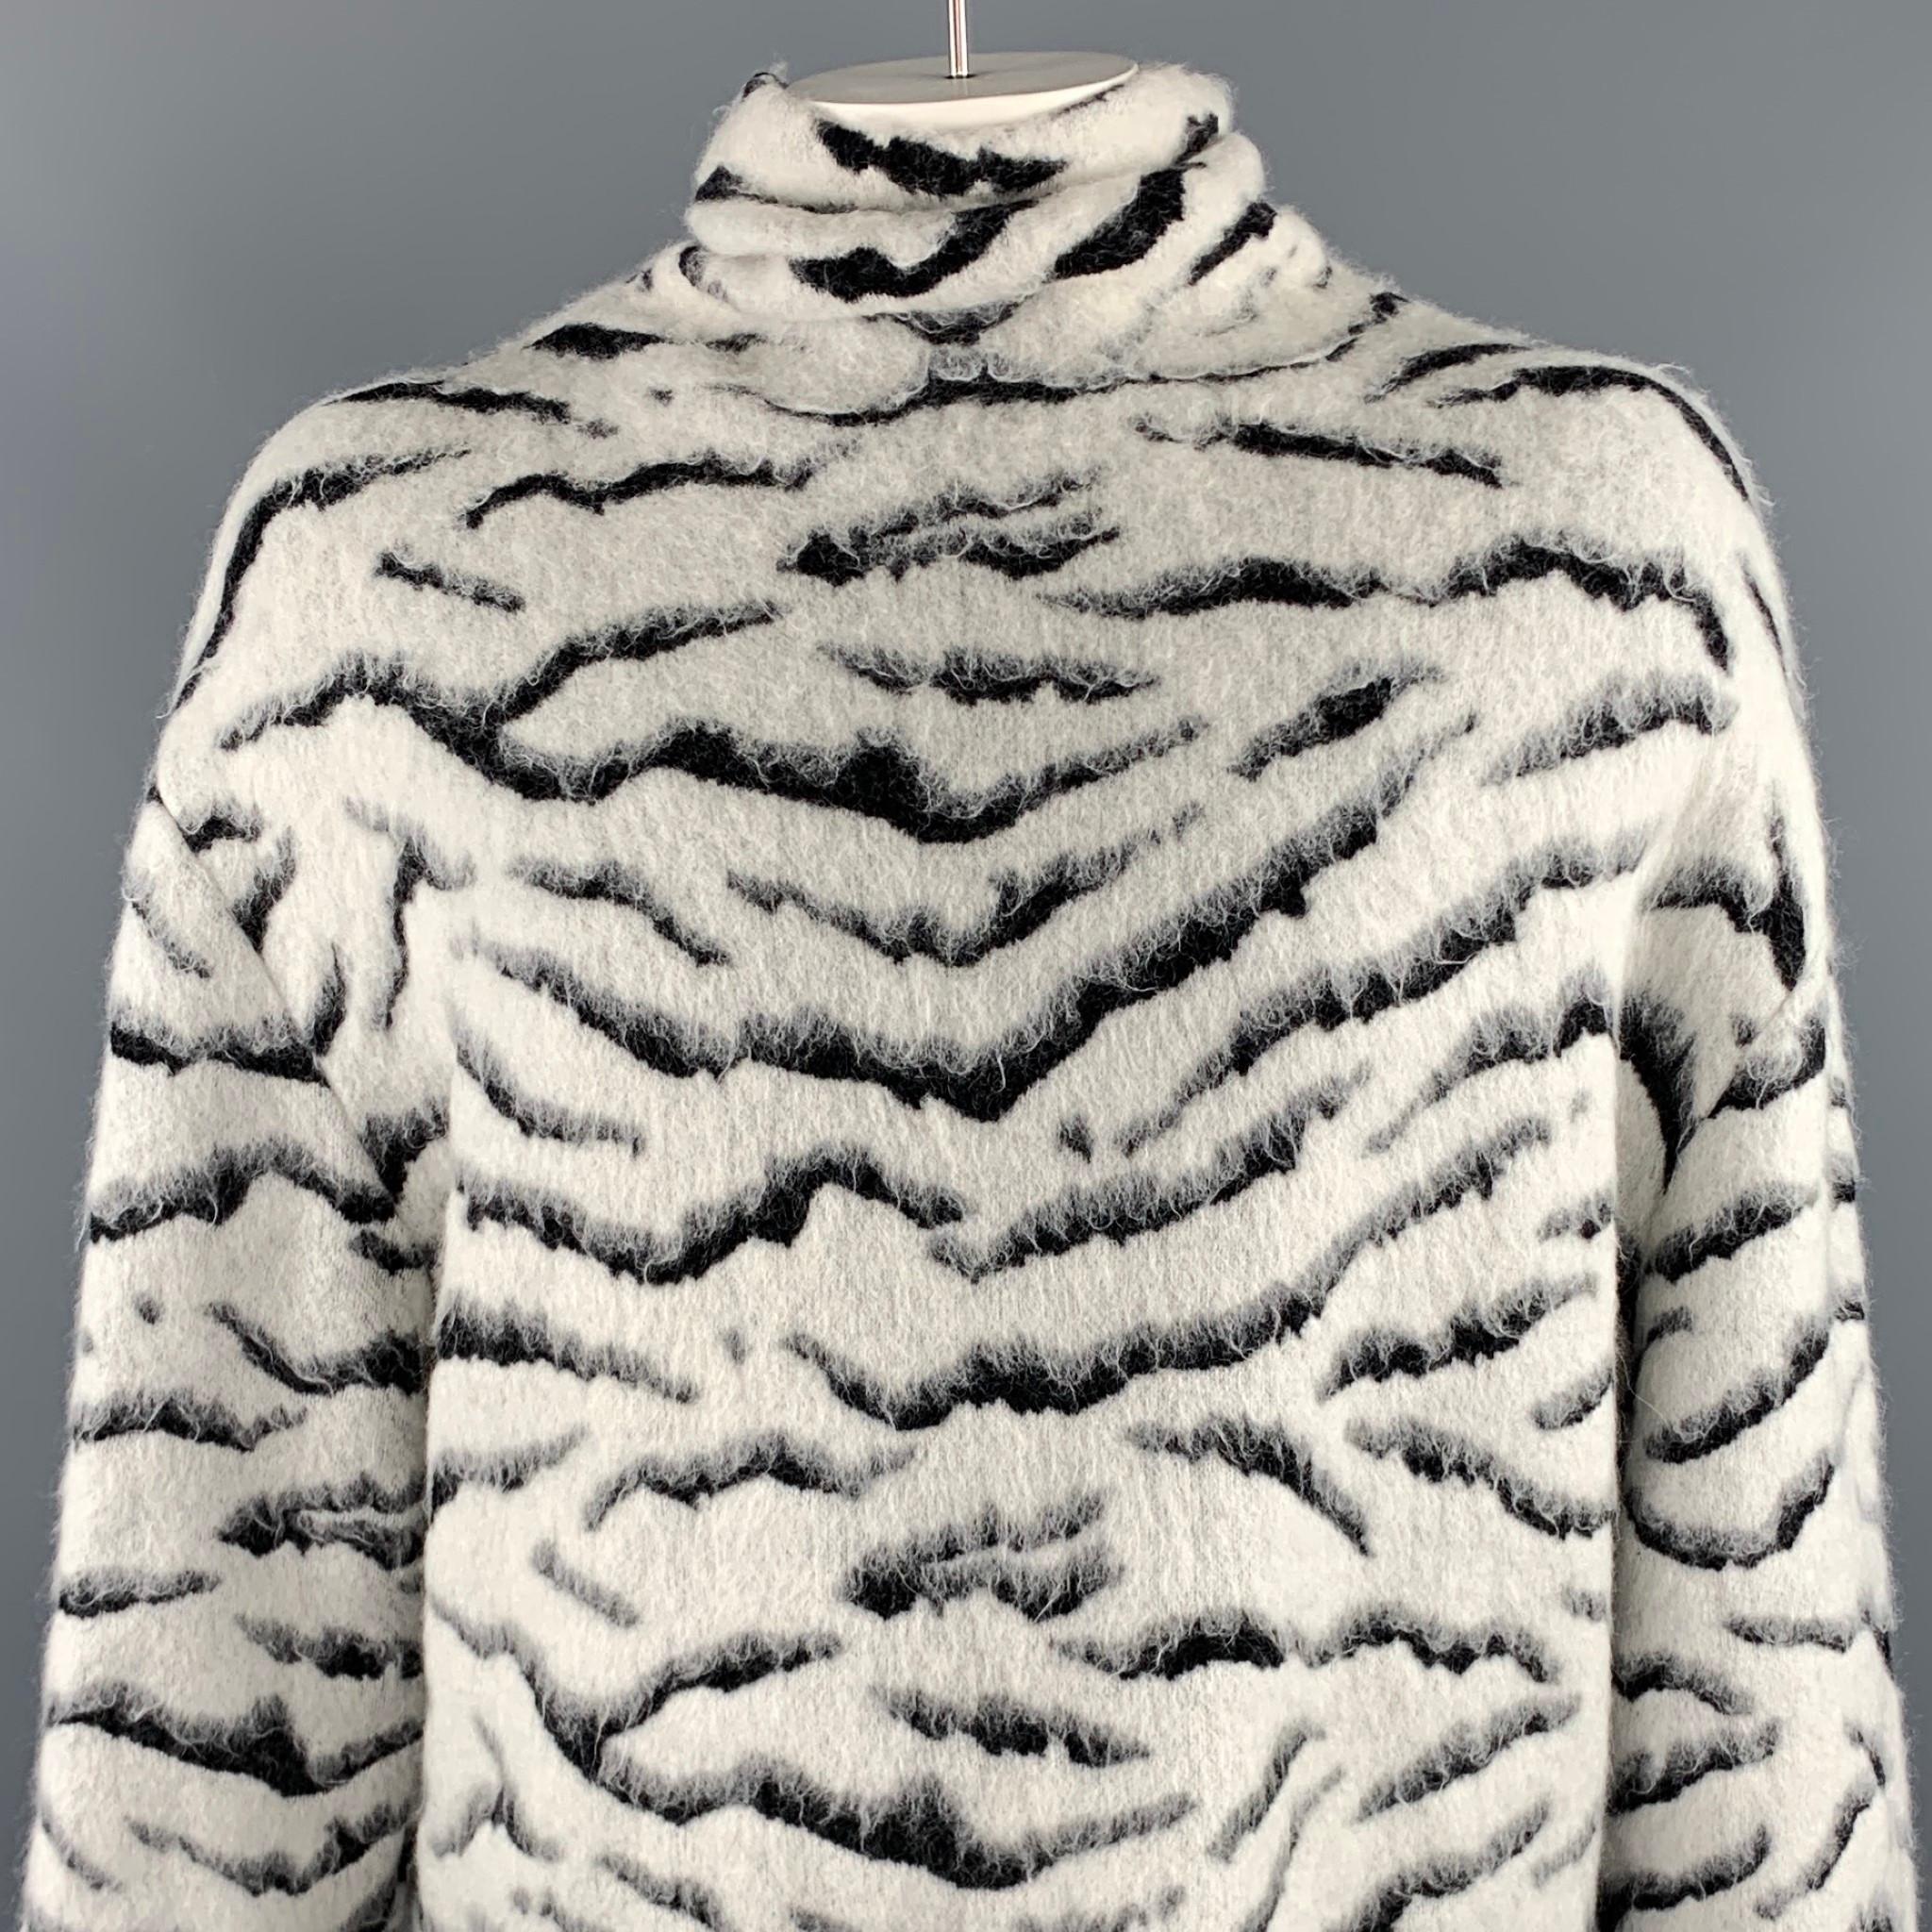 GIVENCHY sweater comes in a white & black tiger print mohair blend featuring a oversized turtleneck style and a back vent. Made in Italy.

Excellent Pre-Owned Condition.
Marked: XS

Measurements:

Shoulder: 20 in. 
Chest: 58 in. 
Sleeve: 22.5 in.